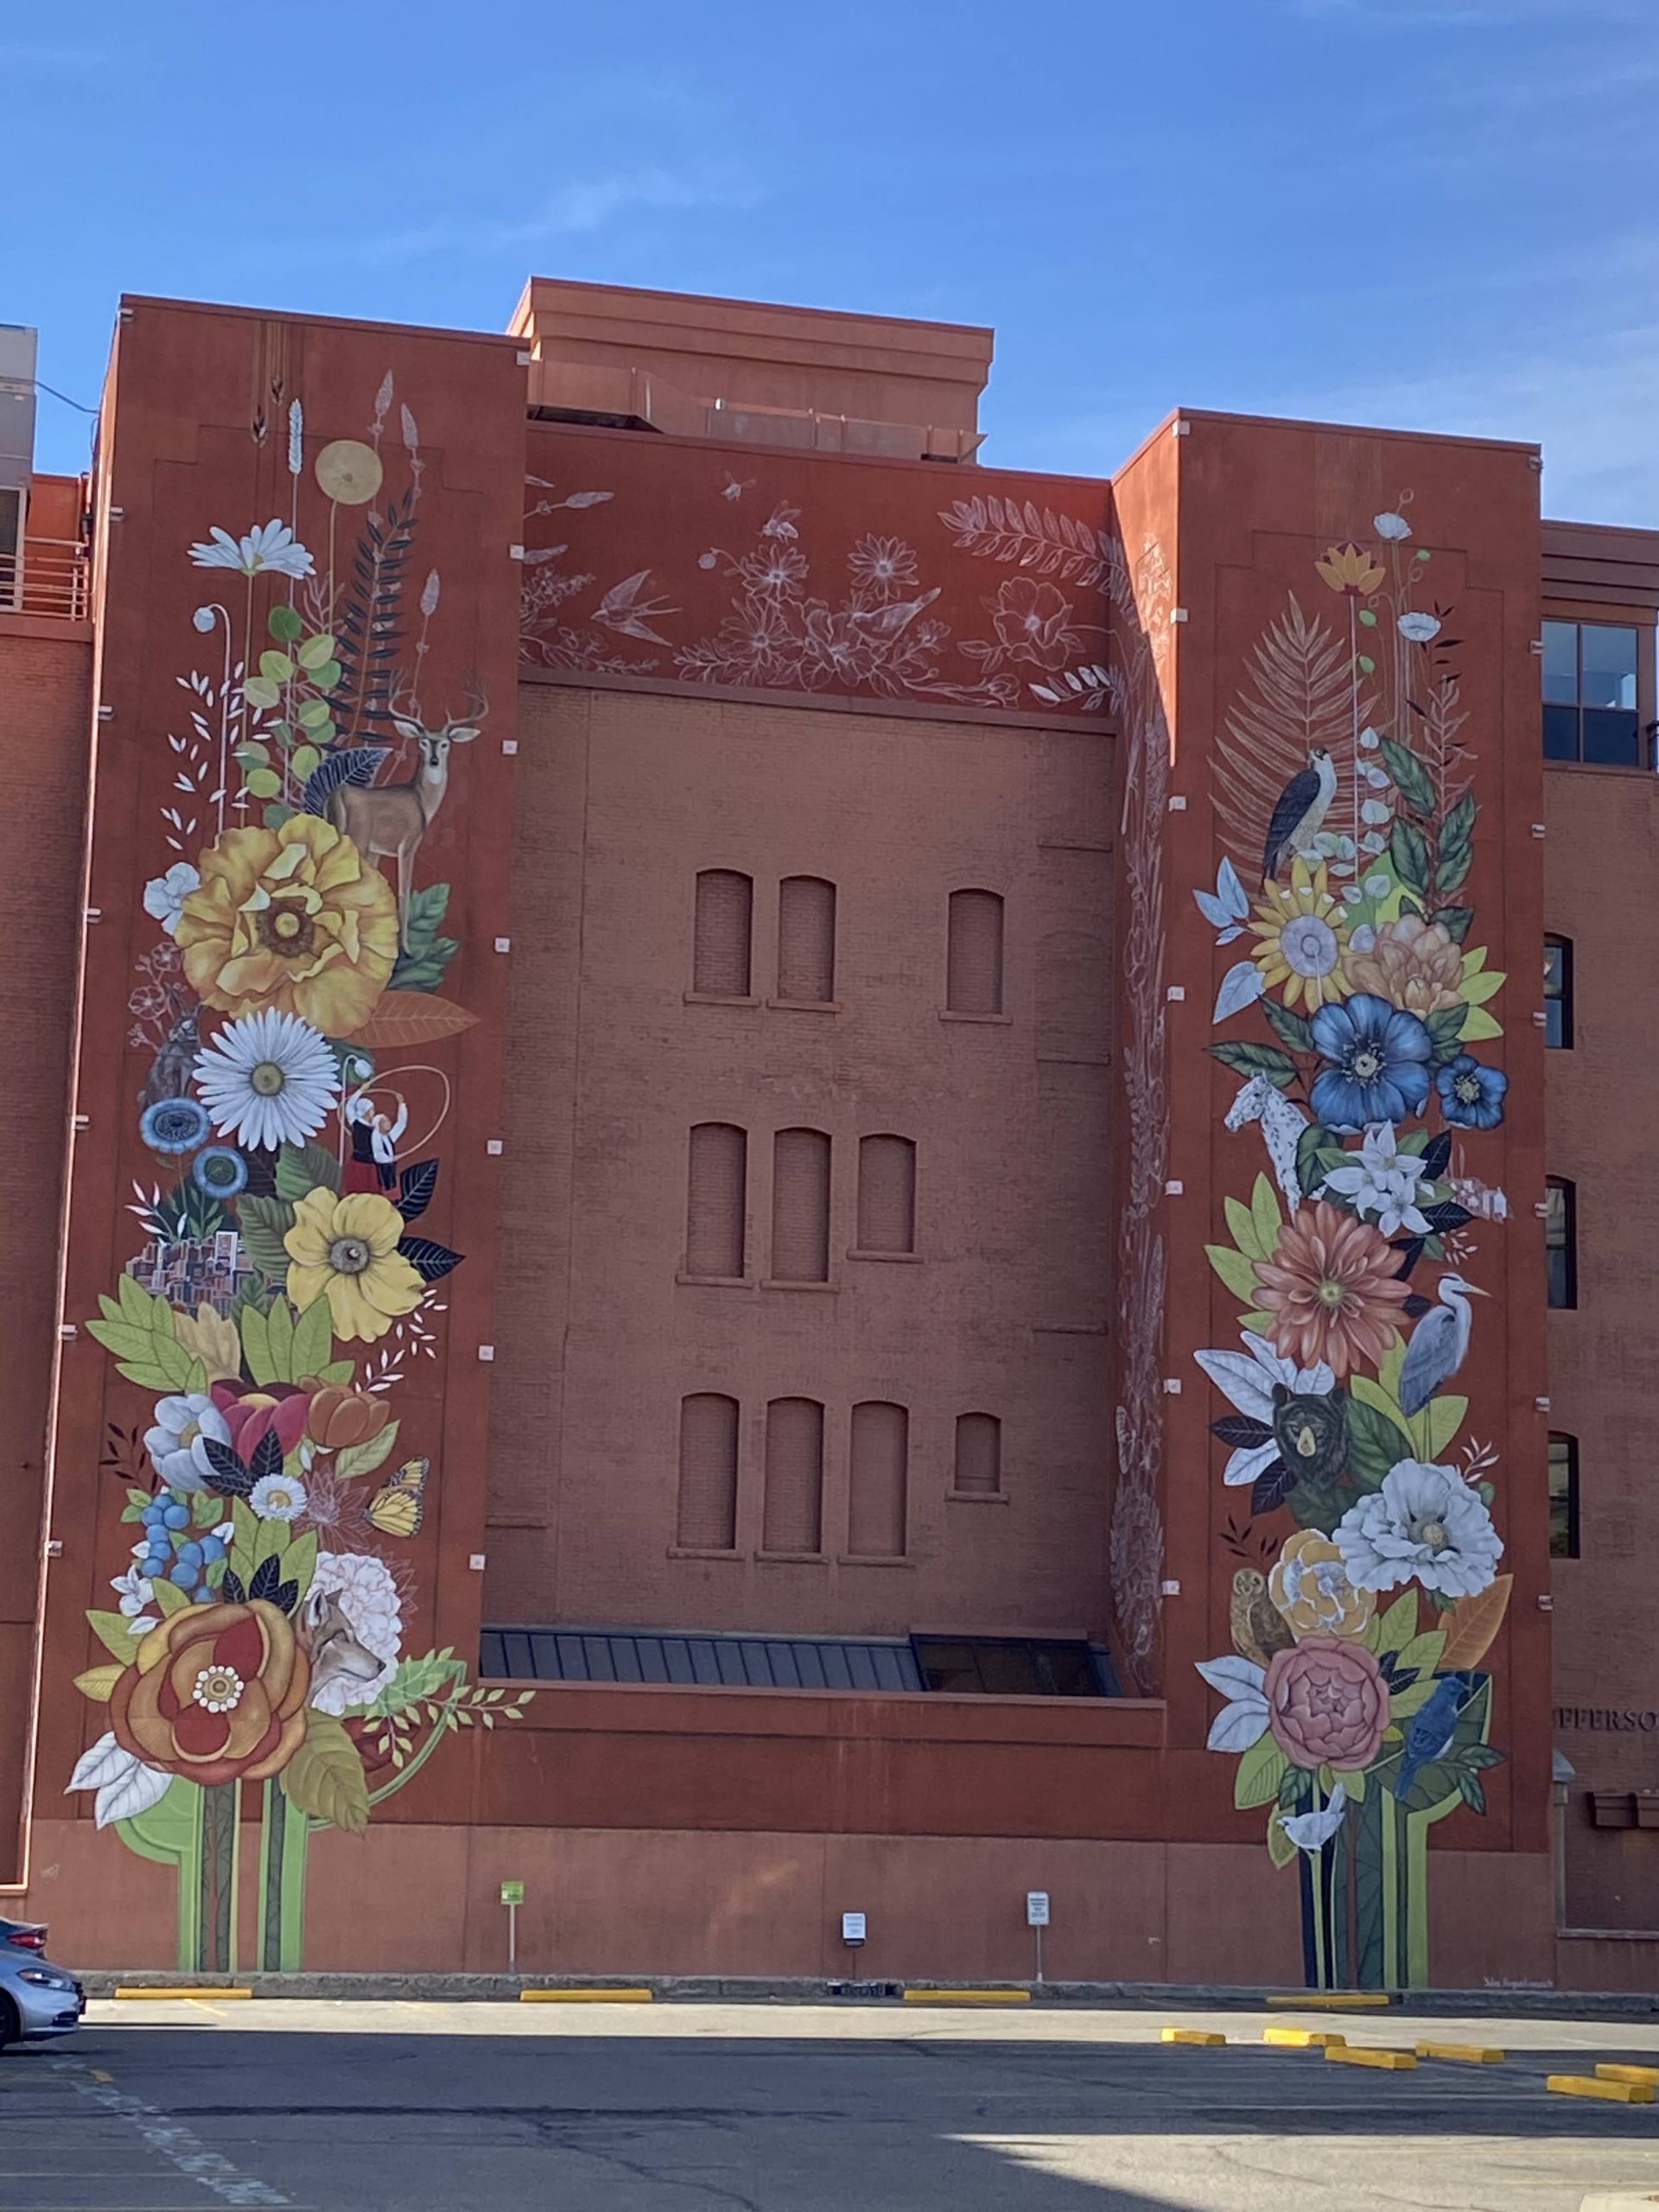 A mural of flowers and birds painted n the outside of a building in Boise, Idaho